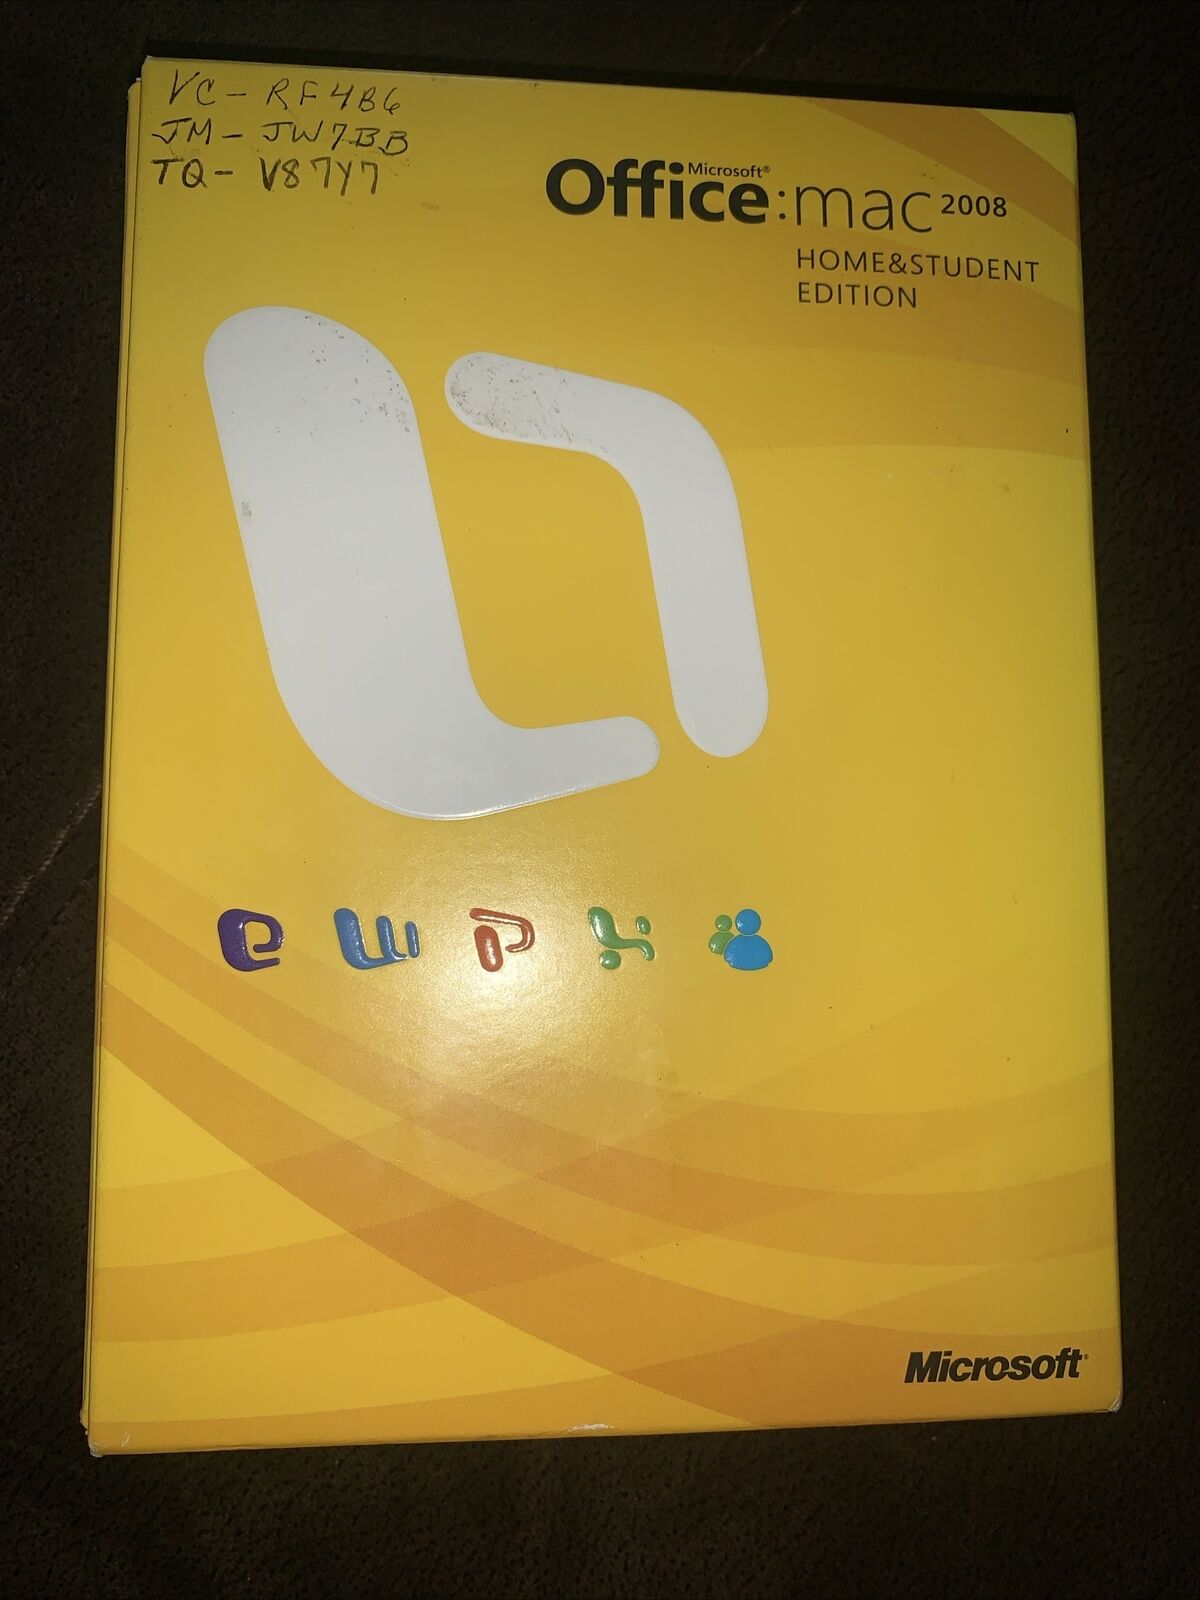 MICROSOFT OFFICE MAC 2008 HOME & STUDENT EDITION WITH 3 PRODUCT KEYS